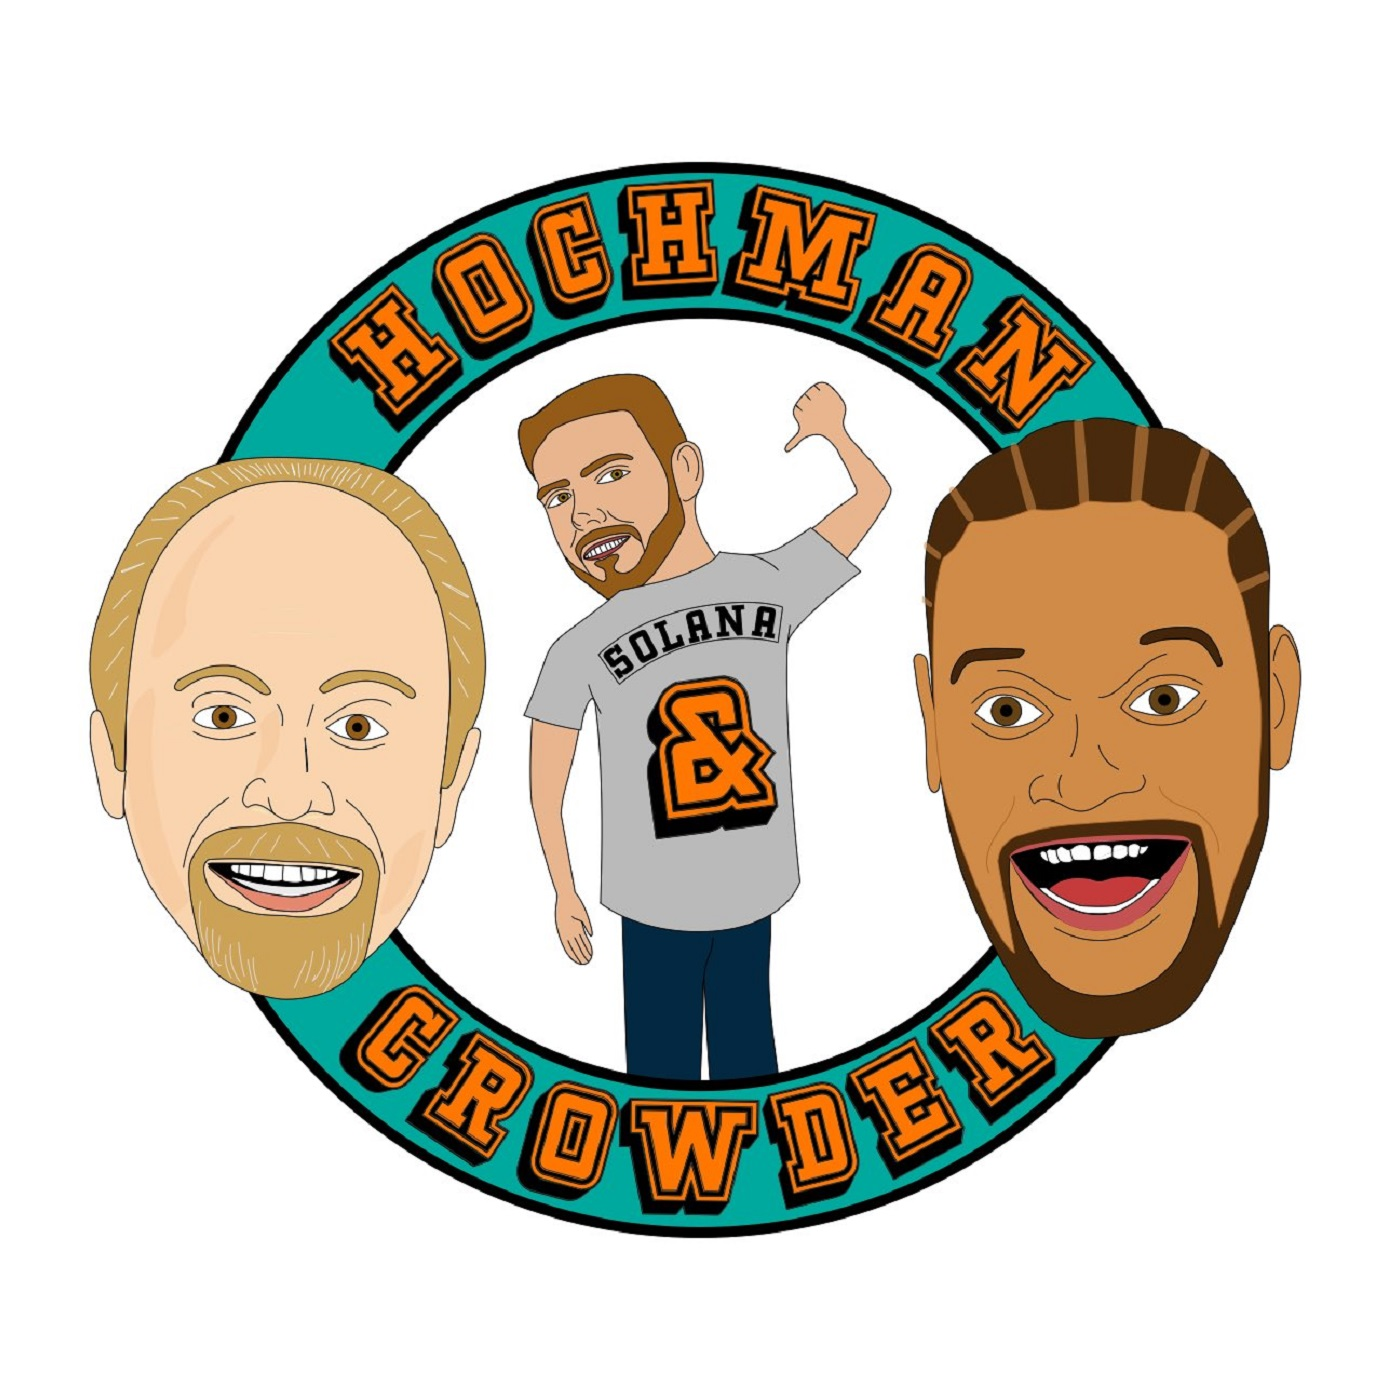 09-30-2019 - Hoch and Crowder Podcast Hour 3